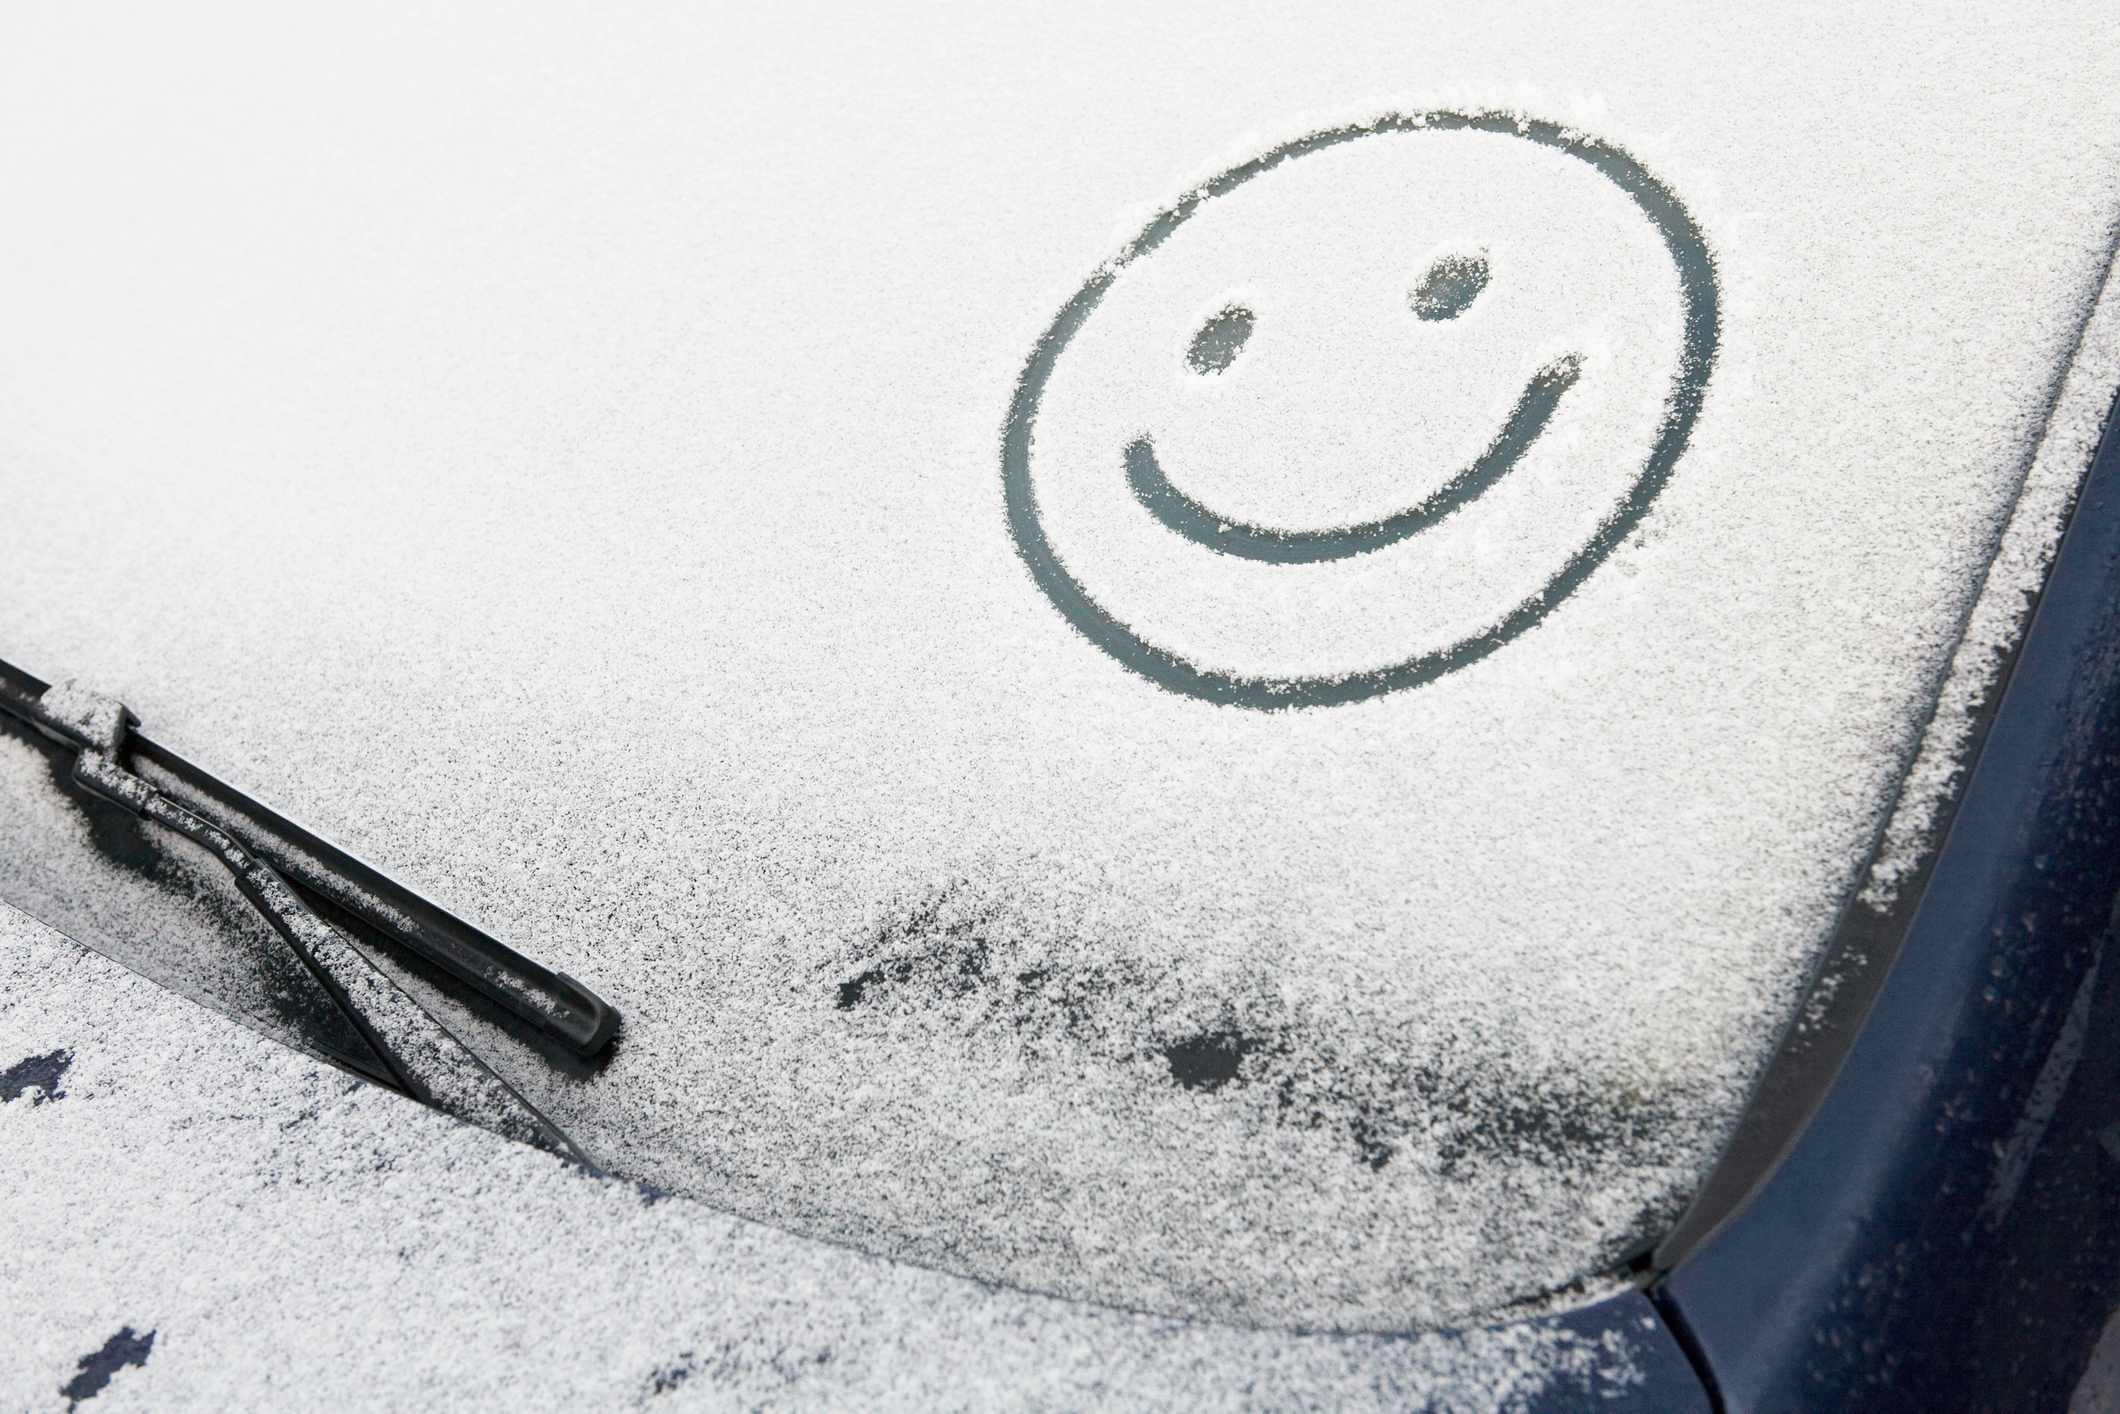 7 Ways to Protect Your Car in winter